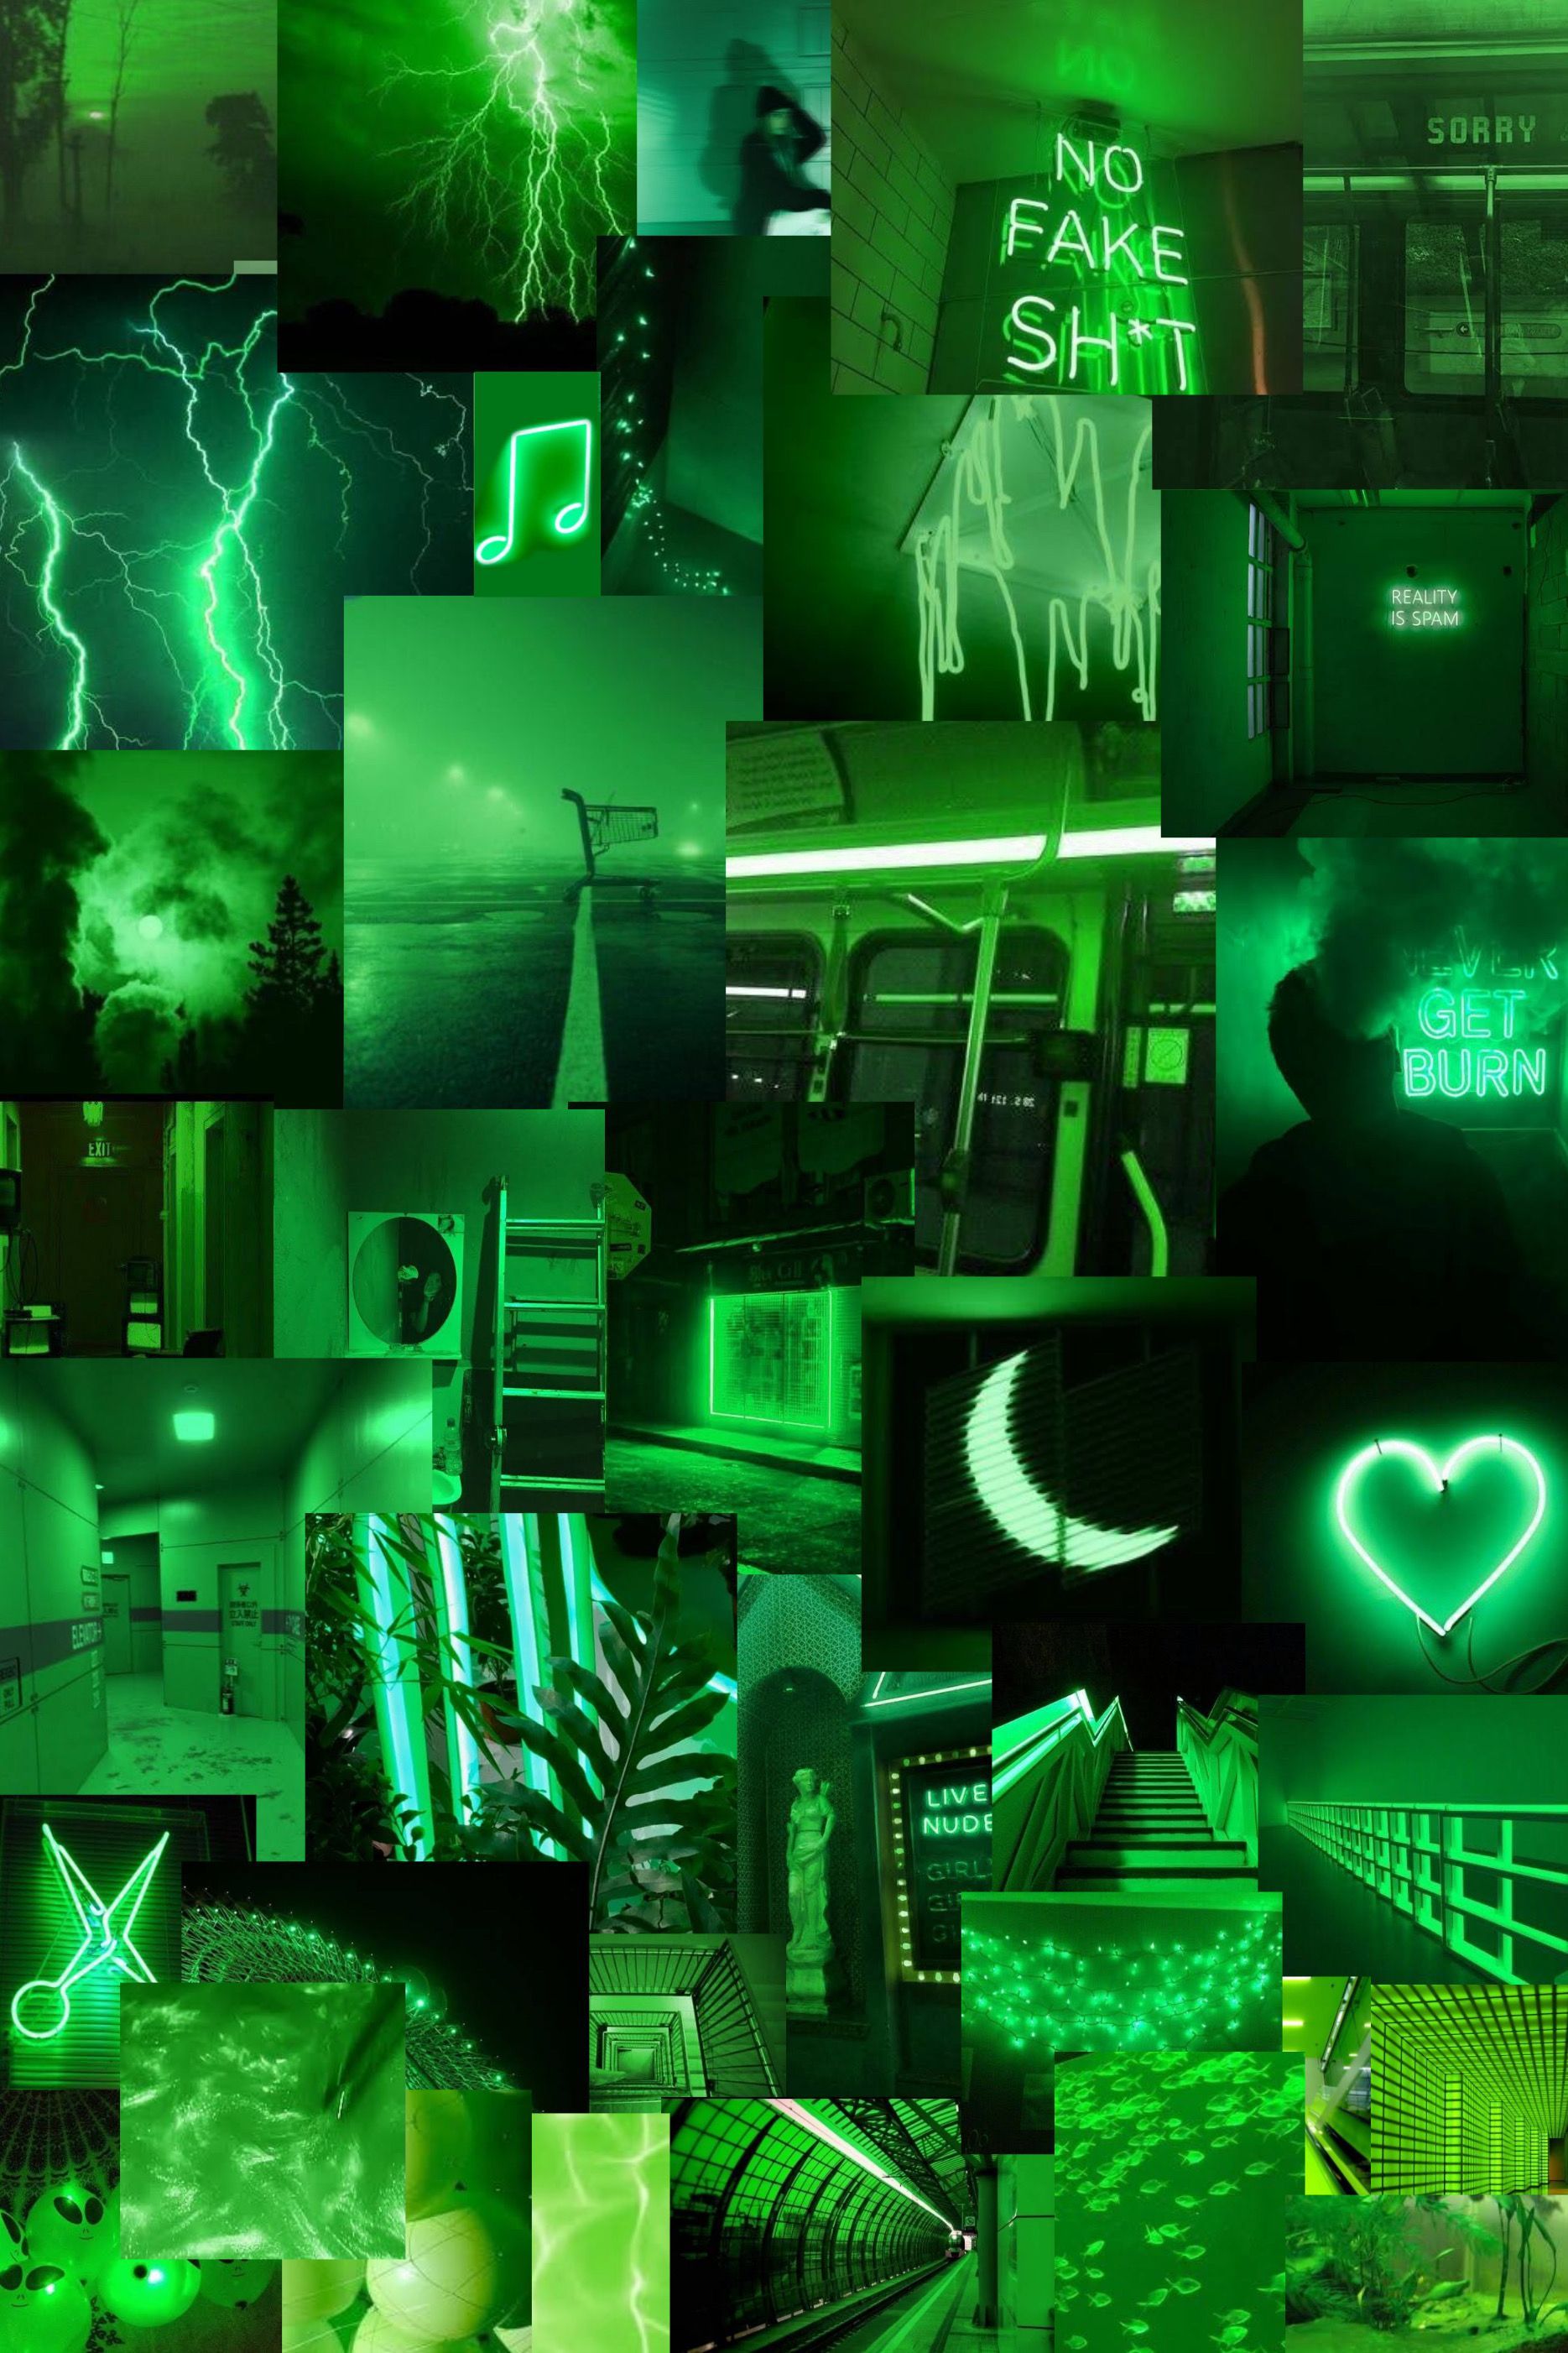 A collage of pictures with green lighting - Green, neon green, lime green